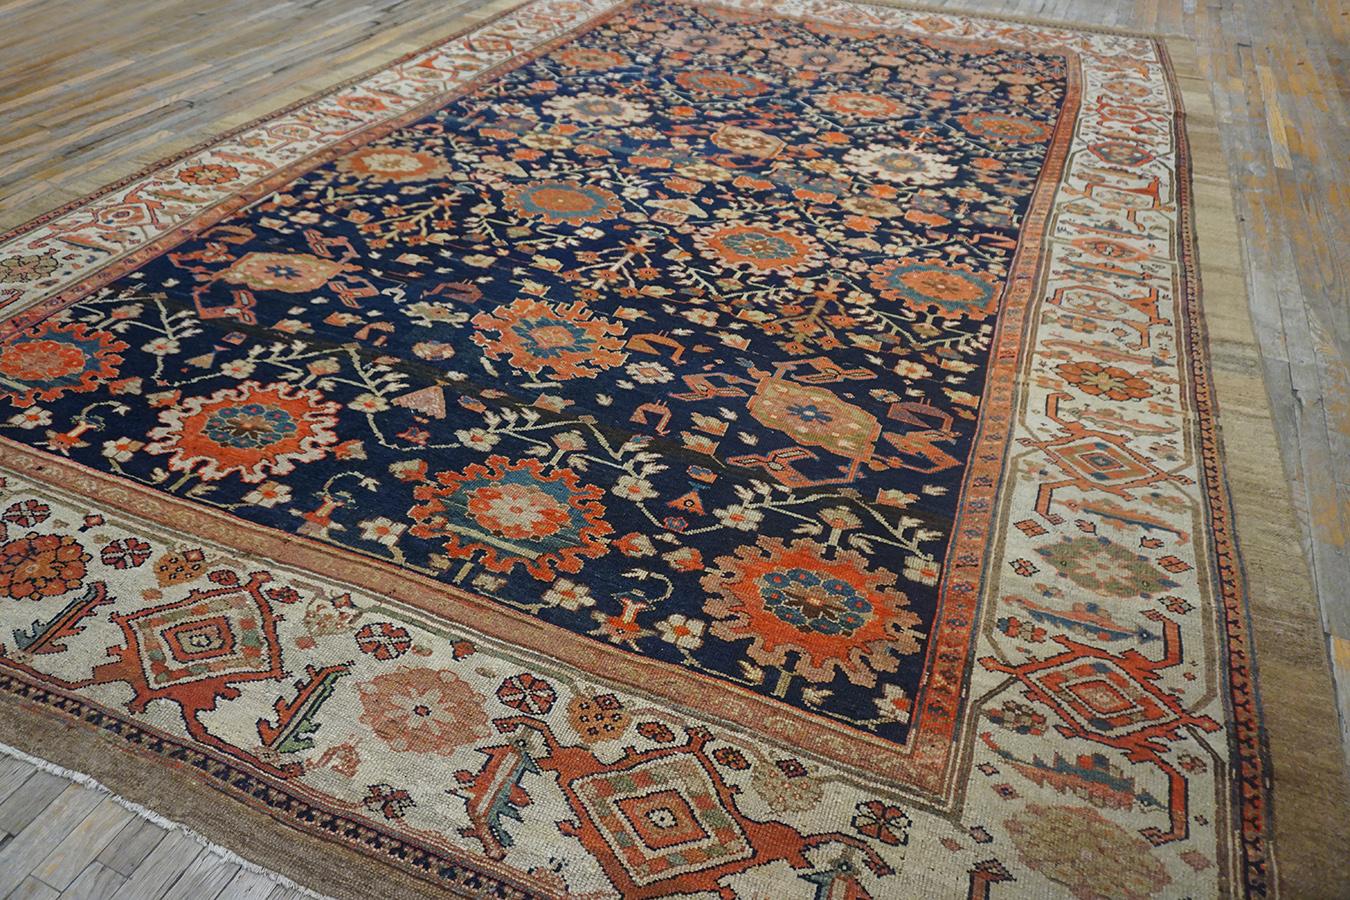 Sultanabad 19th Century Persian Bibikabad Carpet with Harshang Pattern ( 10'7